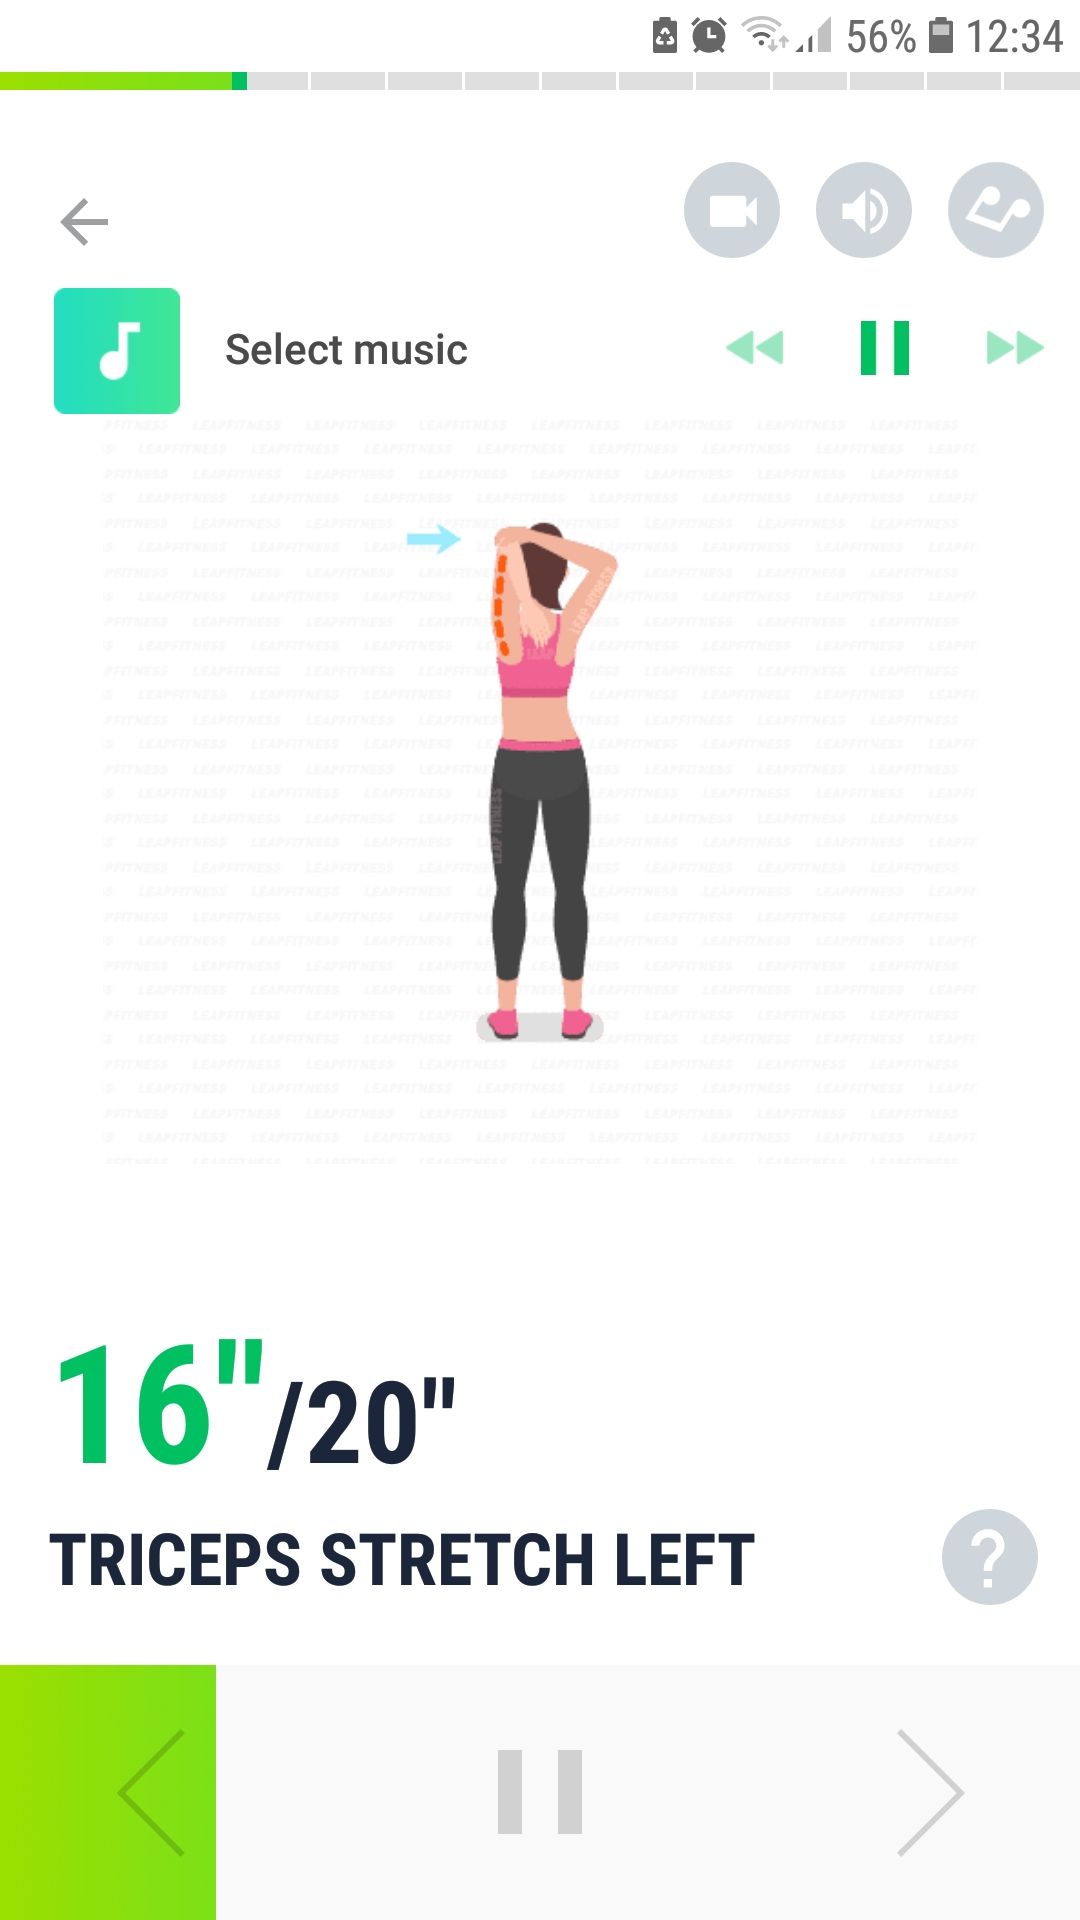 Stretch Exercise and Flexibility mobile app Stretching Exercises